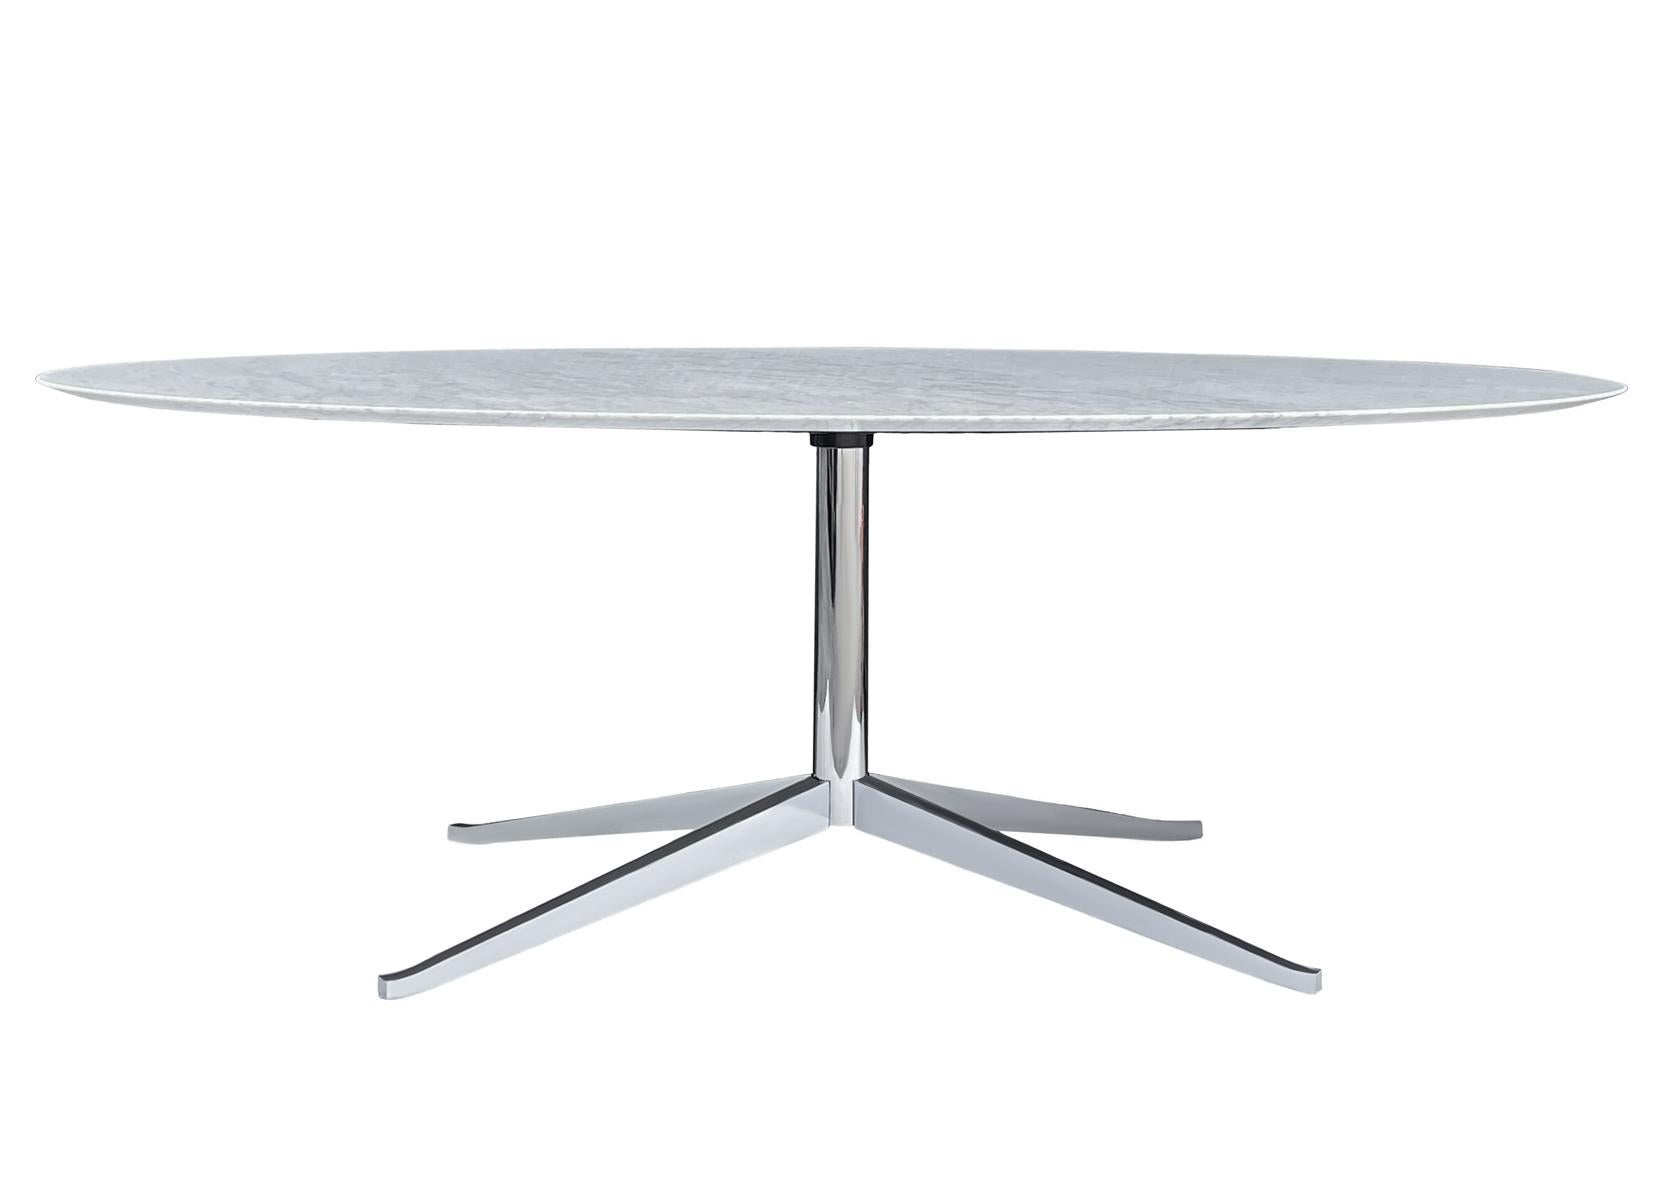 An elegant executive table designed by Florence Knoll and produced by Knoll. It features a beautiful polished white & gray Carrara marble top and a chrome-plated star base. This was one of the most expensive marble options for this table. Signed